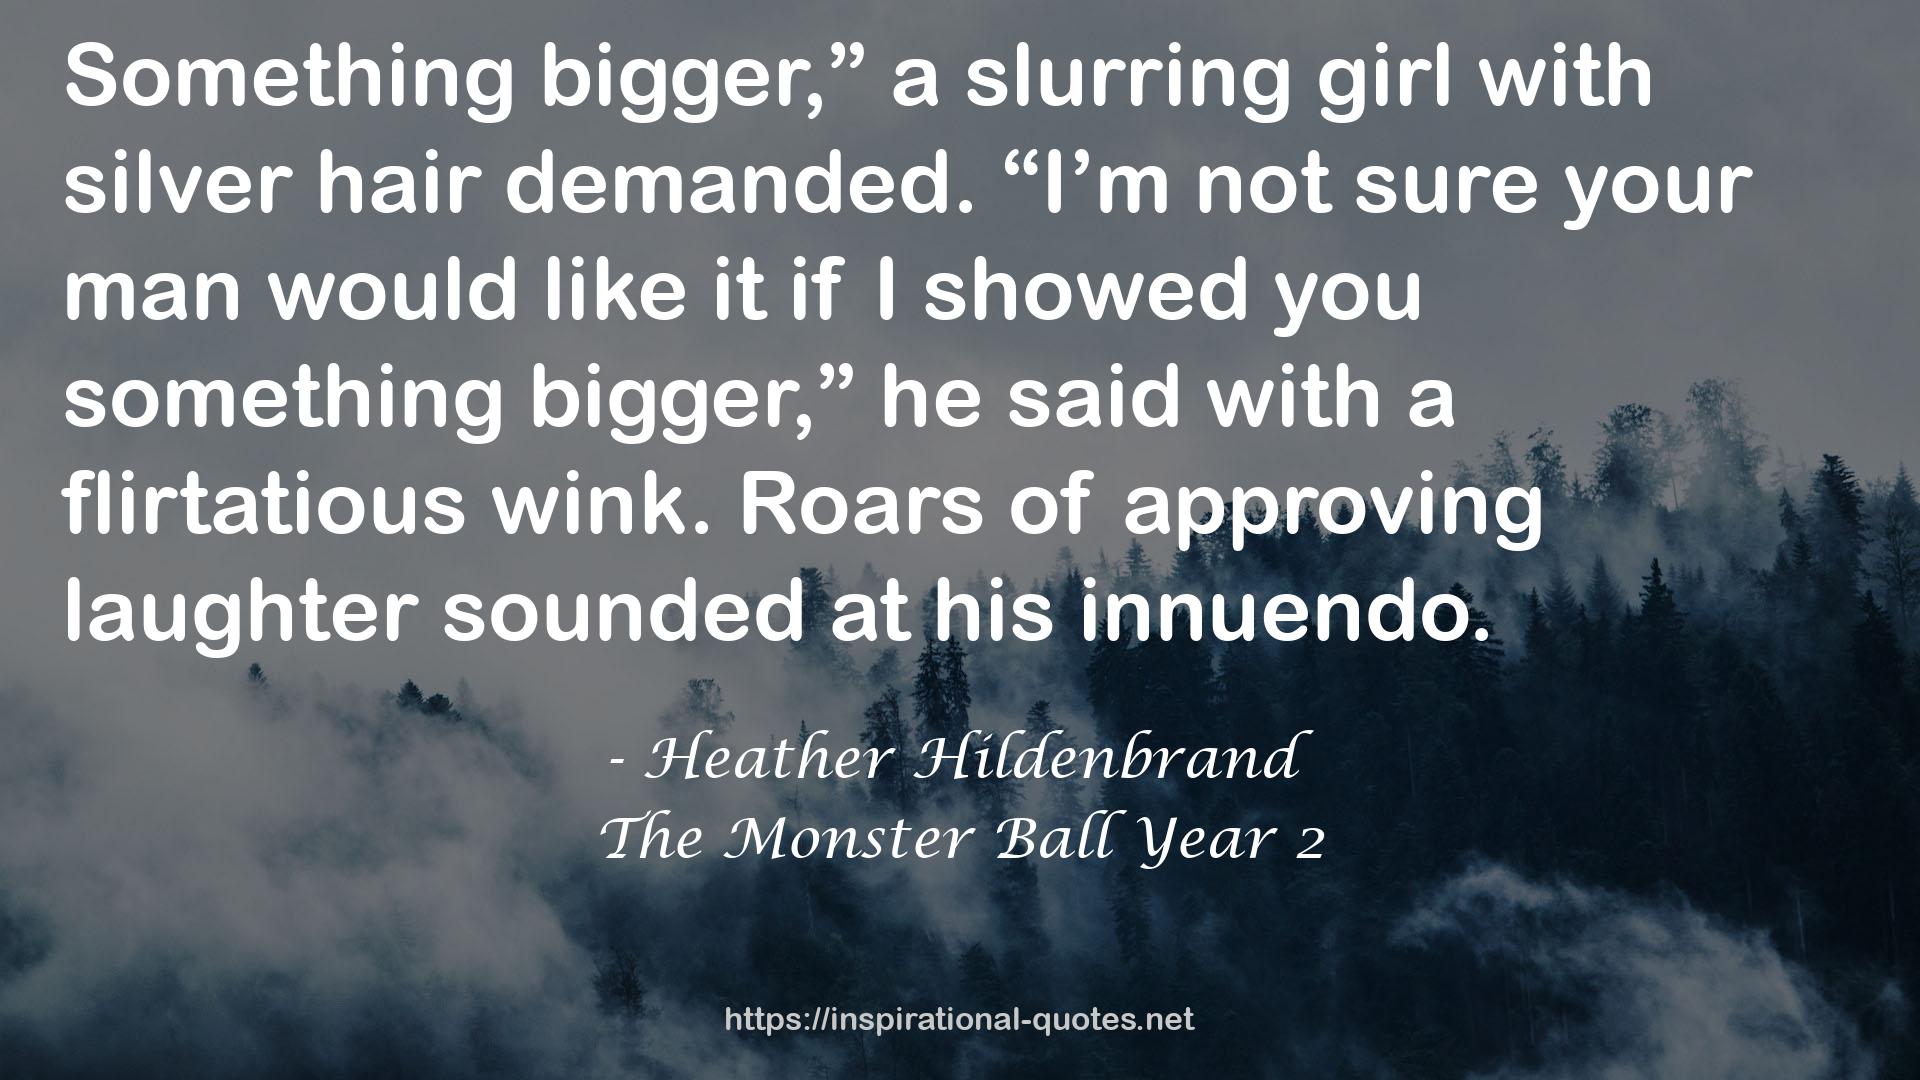 The Monster Ball Year 2 QUOTES